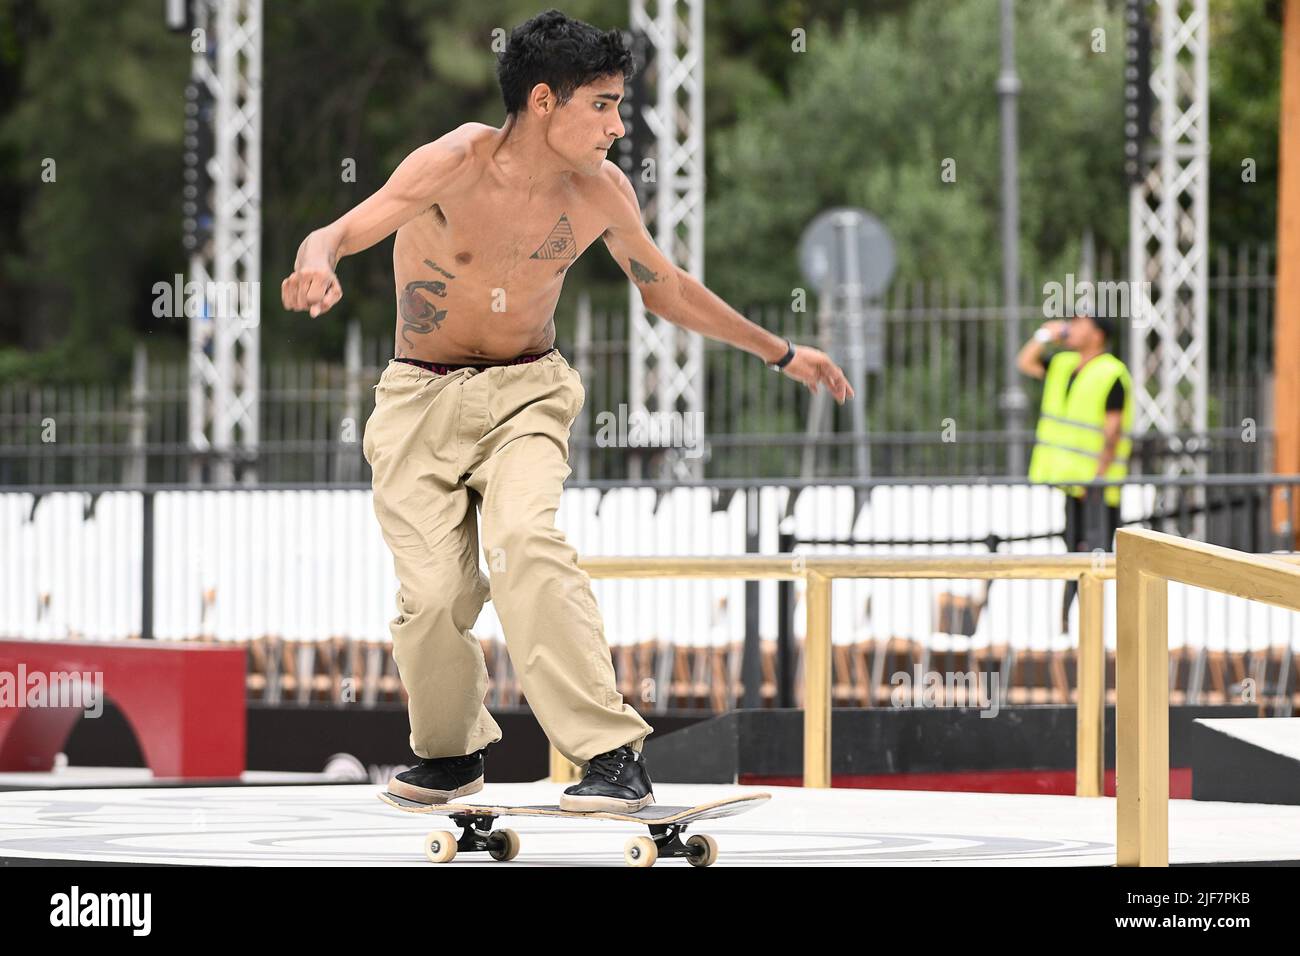 Rome, Italy. 28th June, 2022. athletes practice the course during Street  Skateboarding, Roma, Italia, at the Colle Oppio Skate Park, 28 Jun 2022  (Photo by AllShotLive/Sipa USA) Credit: Sipa USA/Alamy Live News